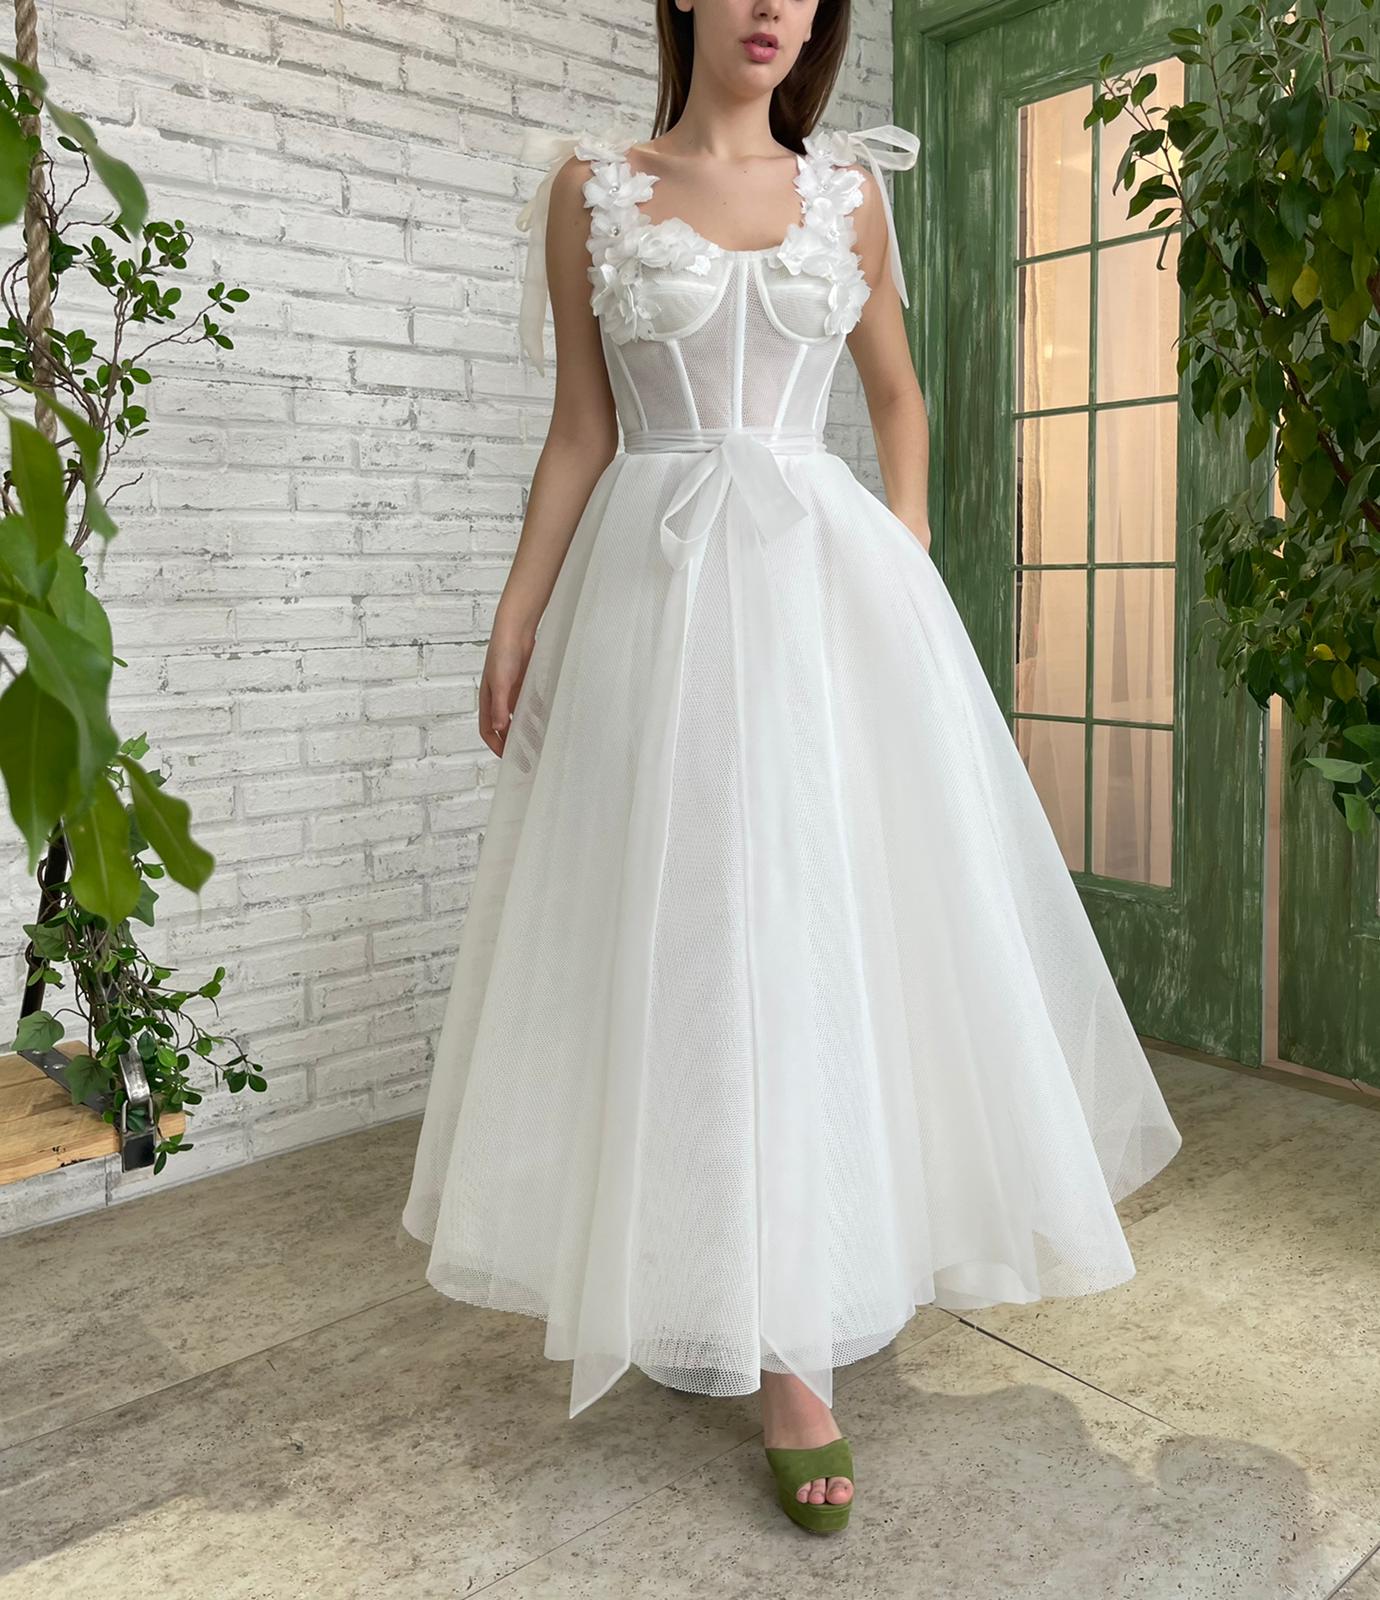 White bridal midi dress with straps, flowers and embroidery